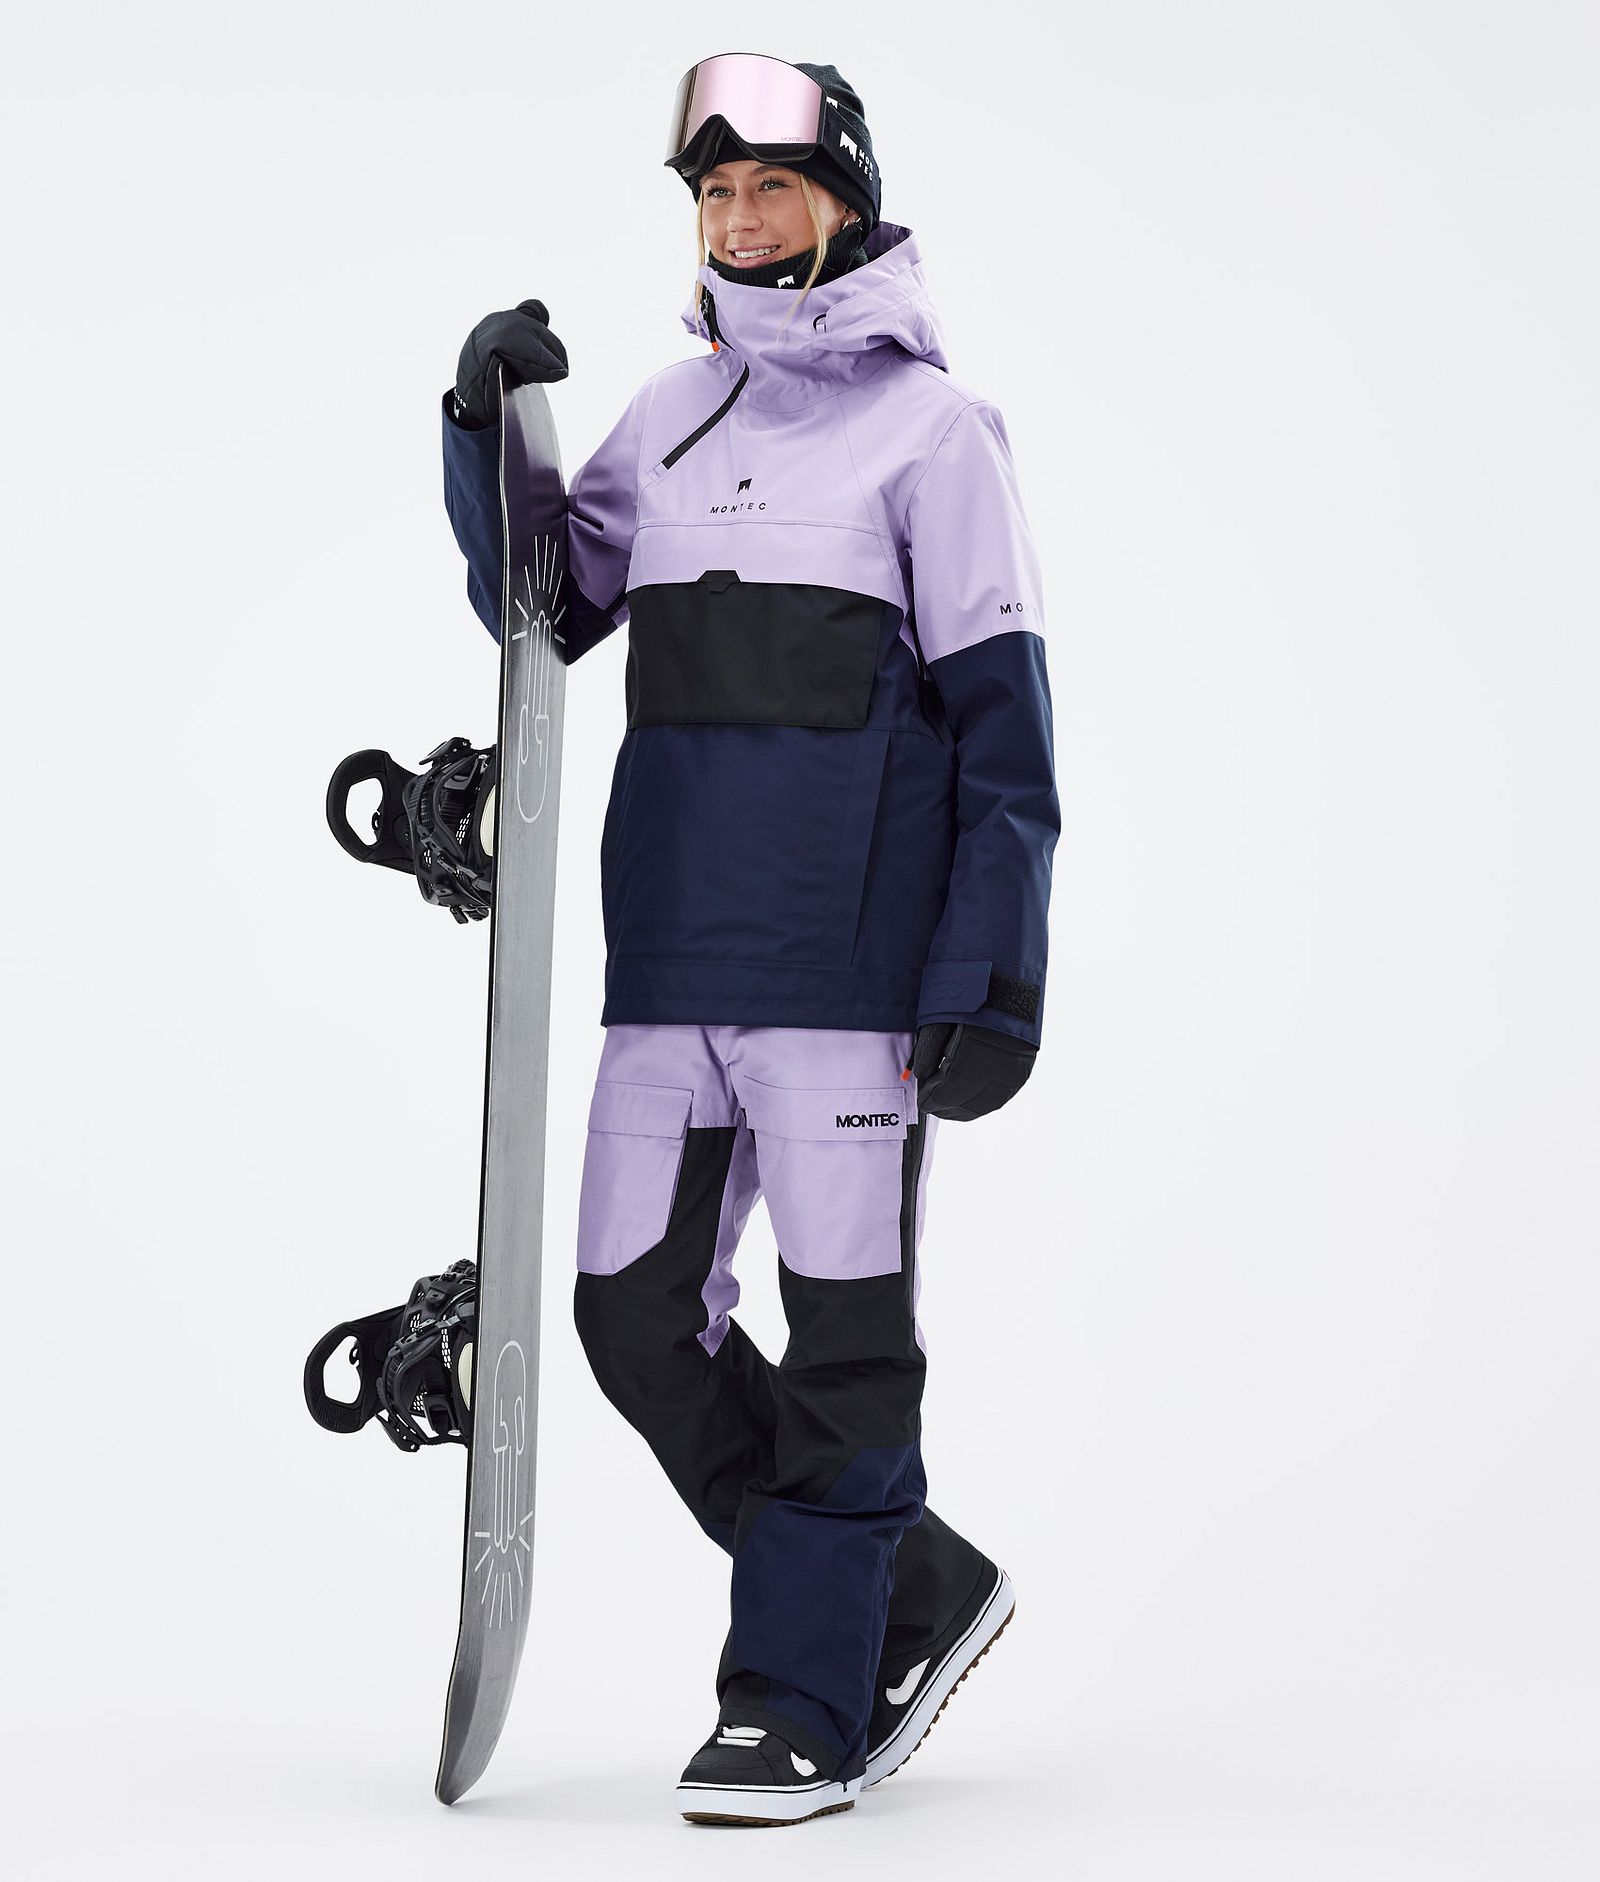 Dune W Outfit de Snowboard Mujer Faded Violet/Black/Dark Blue